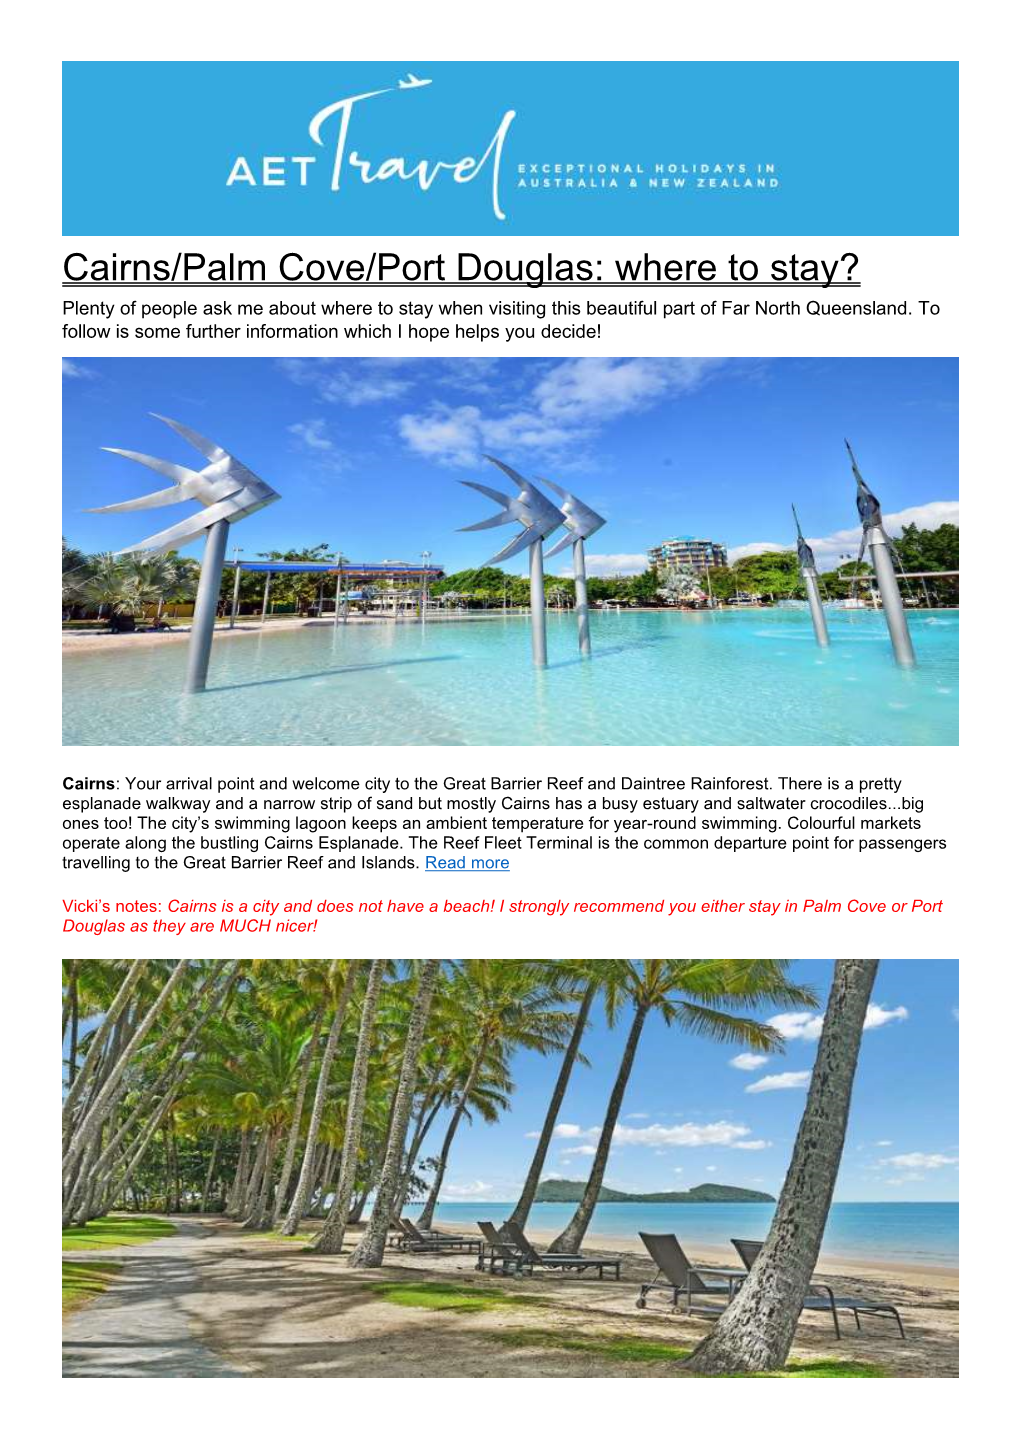 Cairns/Palm Cove/Port Douglas: Where to Stay? Plenty of People Ask Me About Where to Stay When Visiting This Beautiful Part of Far North Queensland